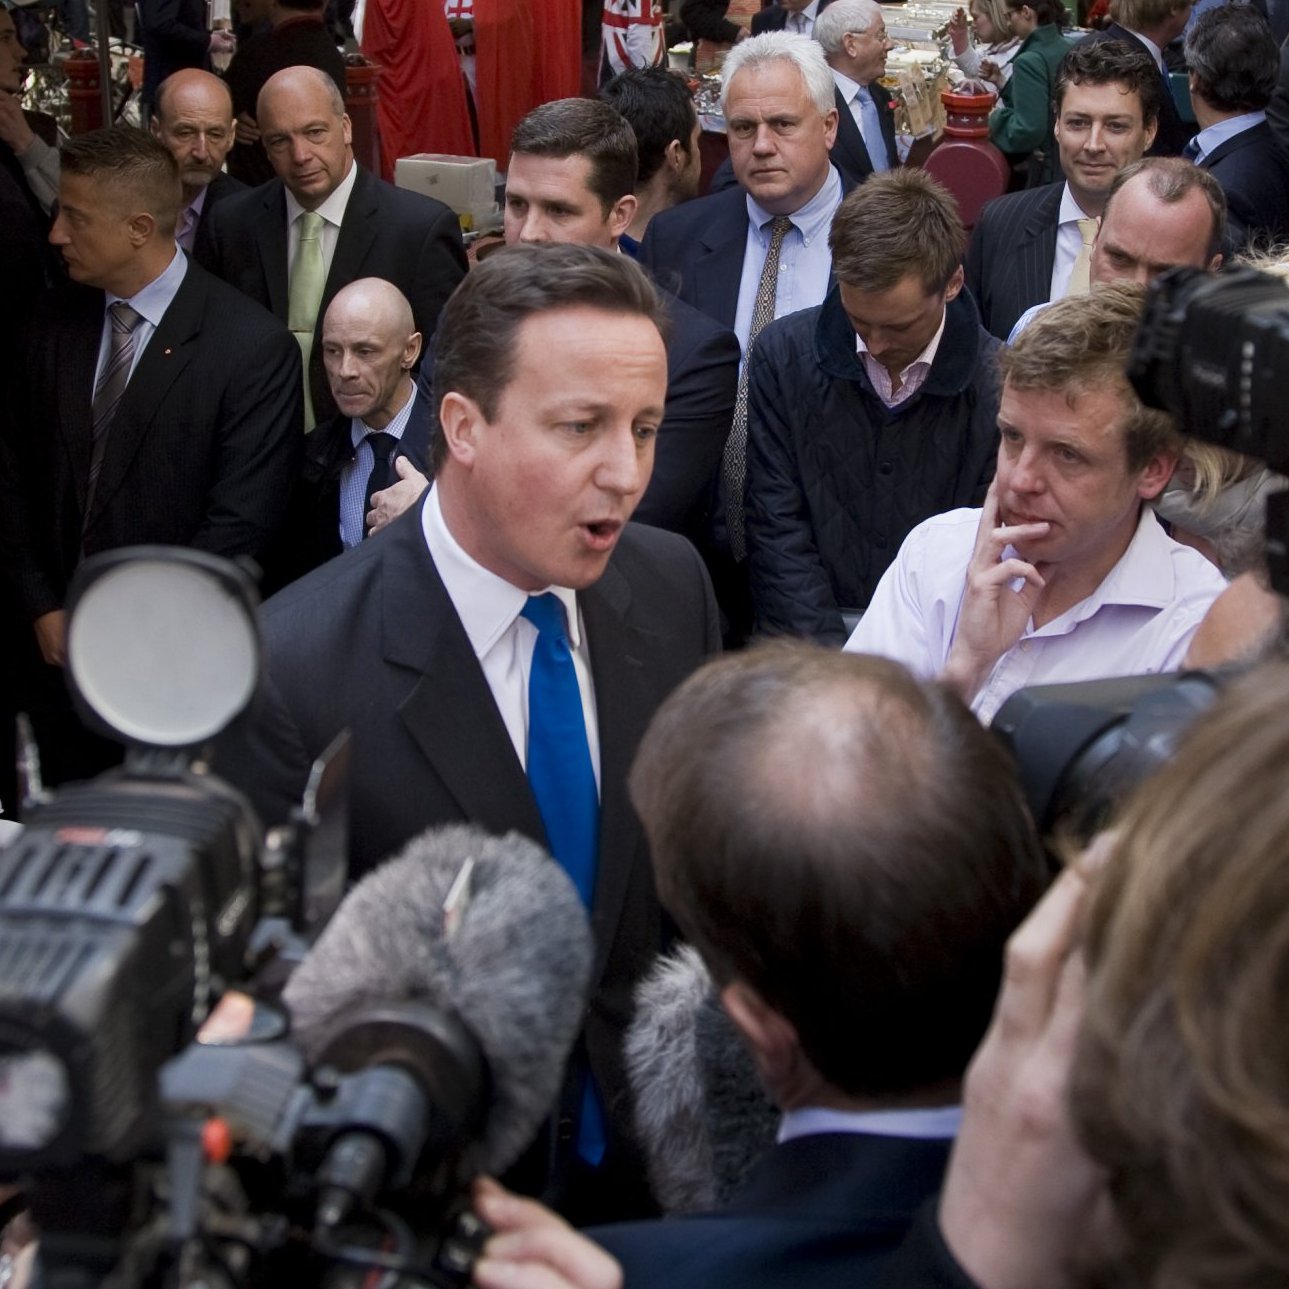 Article thumbnail: “Broken Britain” was a phrase first used by David Cameron in 2010 in the run up to the general election, after which he moved smartly to do some vigorous breaking up of his own. (Photo by John Phillips/UK Press via Getty Images)